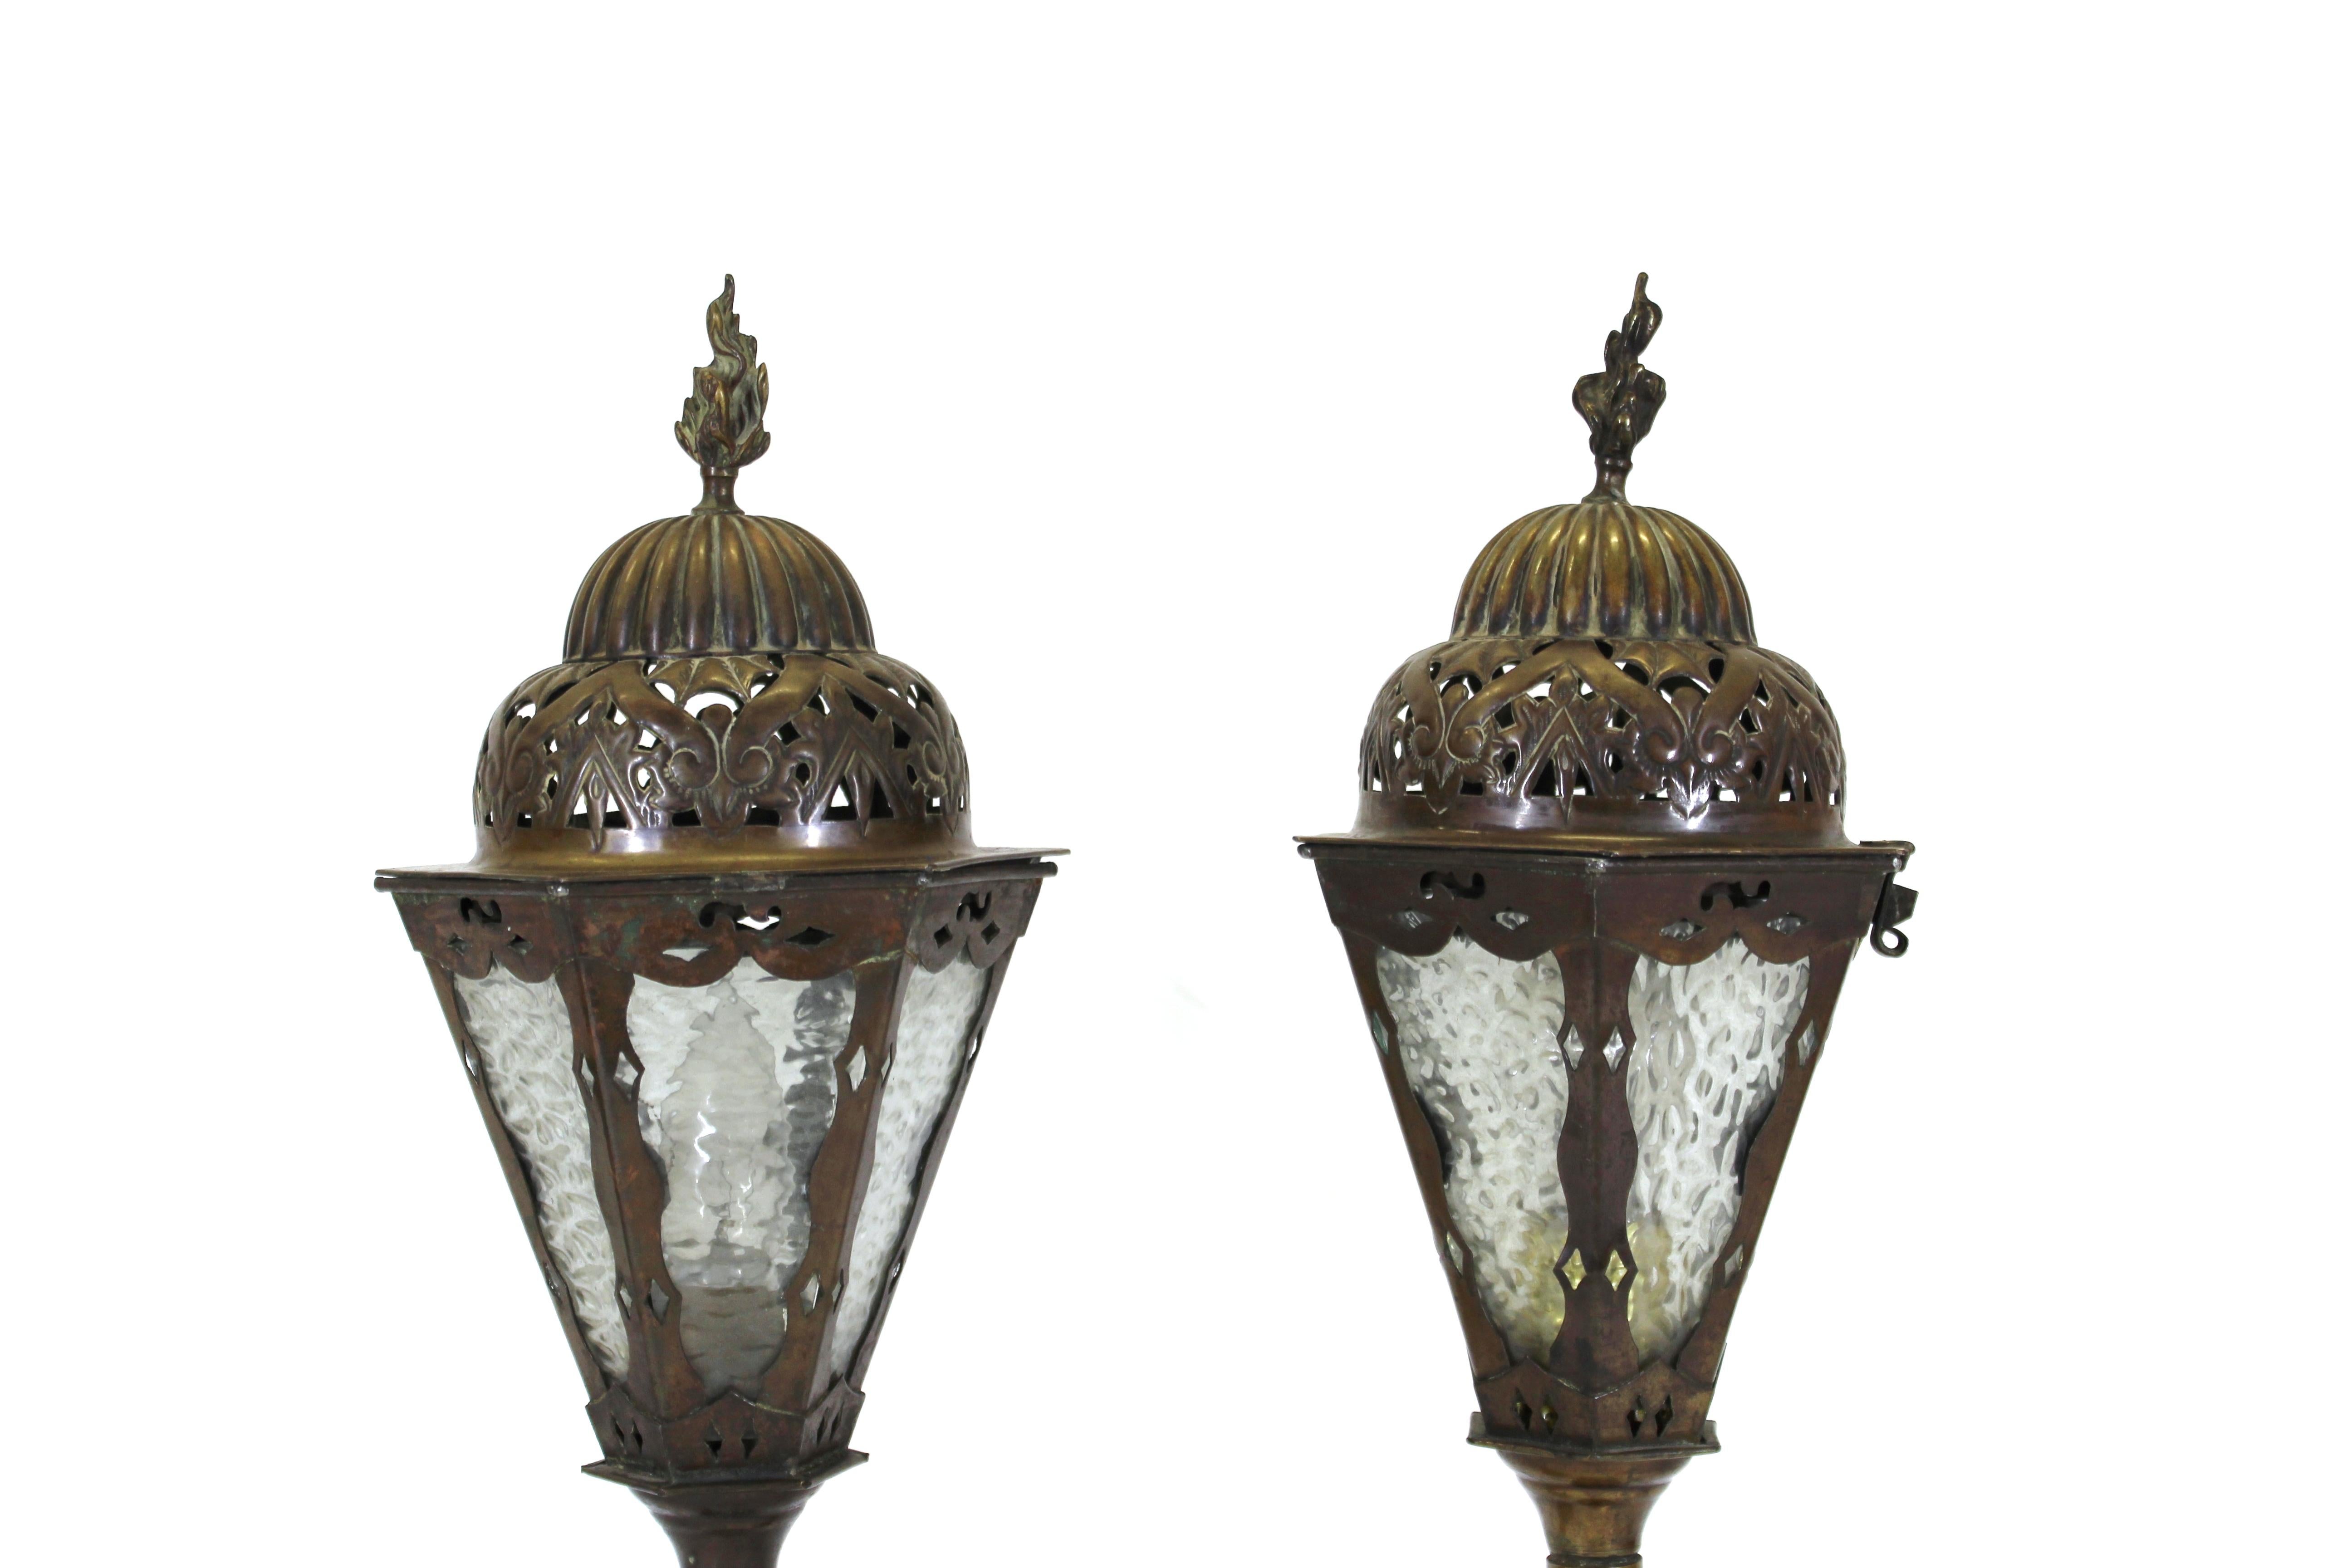 Italian Renaissance Revival pair of lantern table lamps in cast bronze, with brass repousse detailing and glass inserts. Handmade in Italy during the 1900s, the pair is in remarkable antique condition with age-appropriate wear and use.